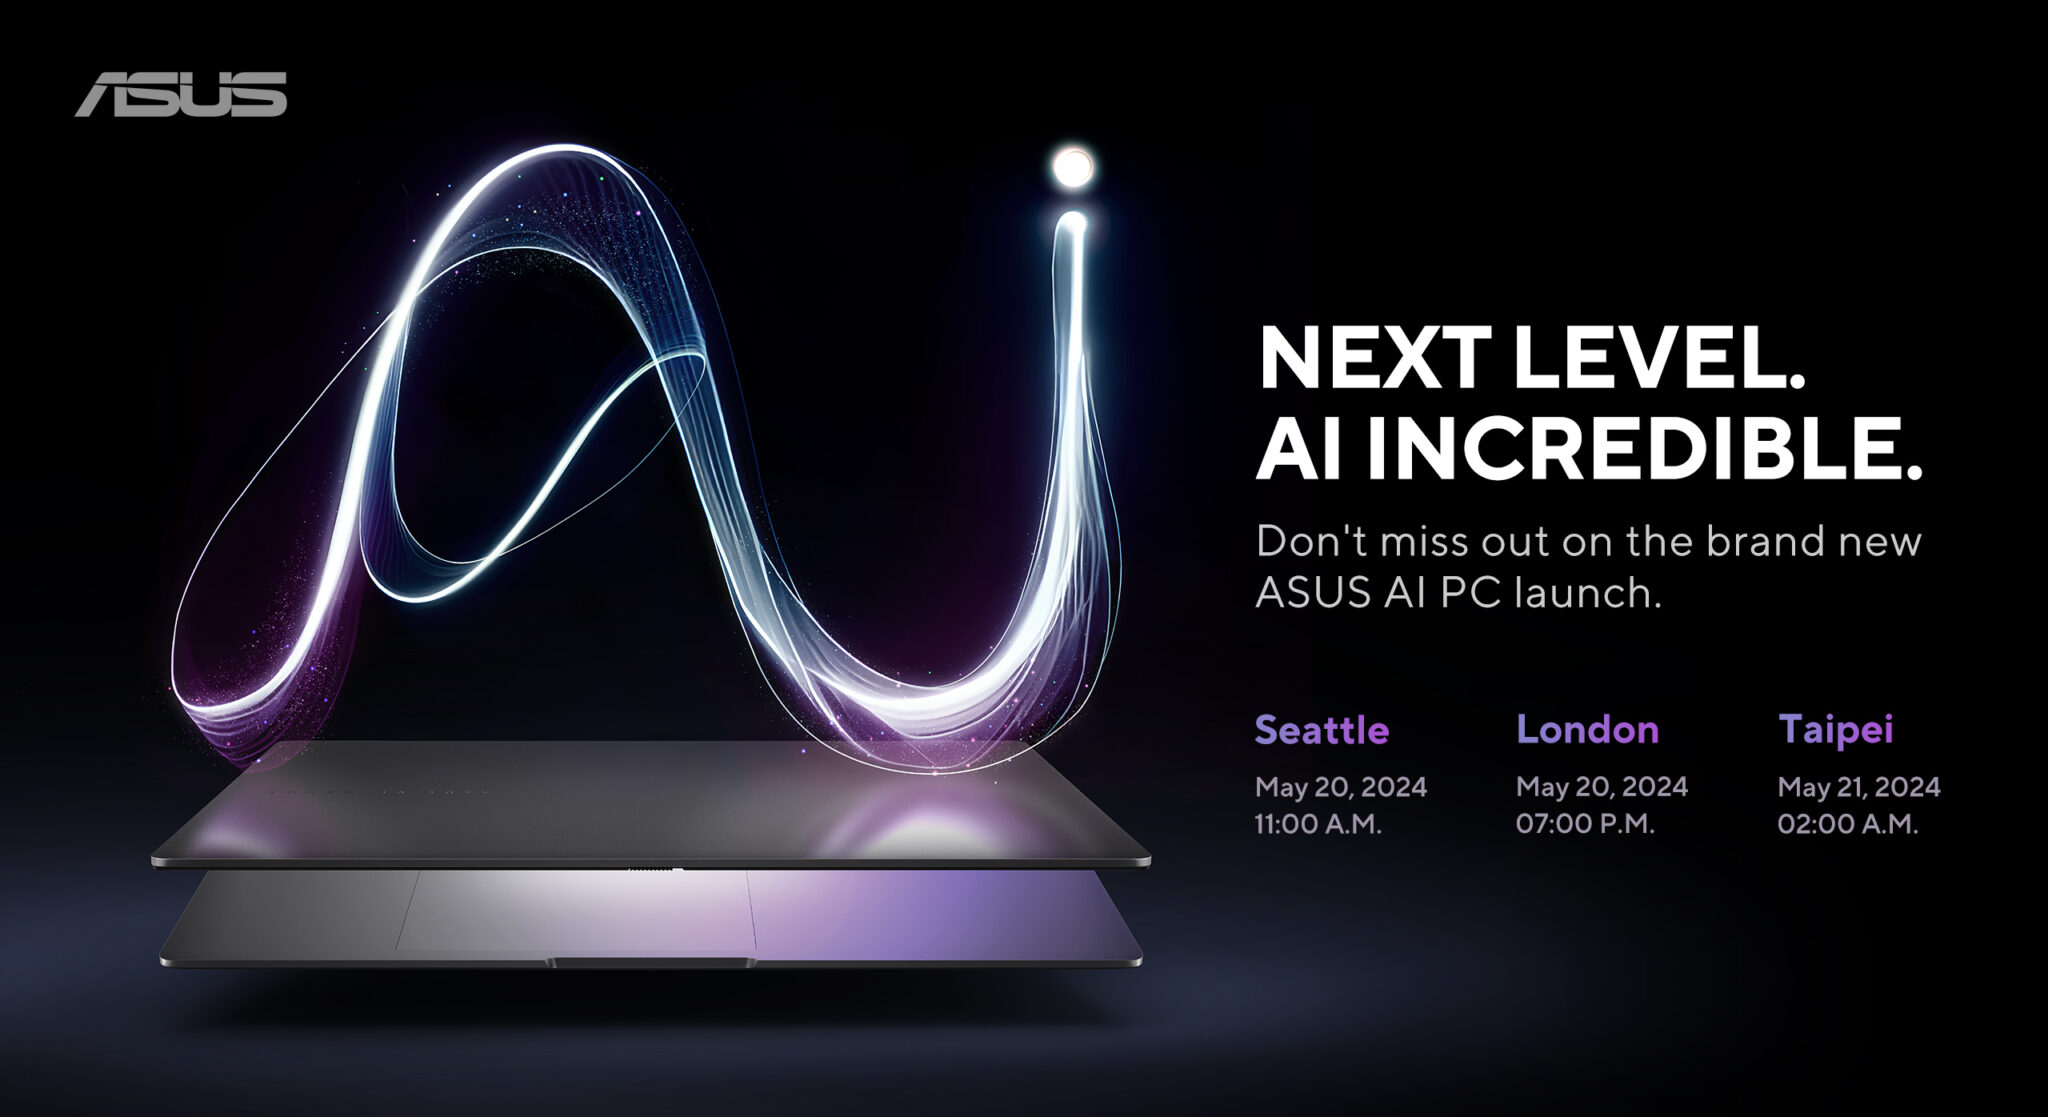 ASUS Announces Next Level. AI Incredible. Launch Event for its first